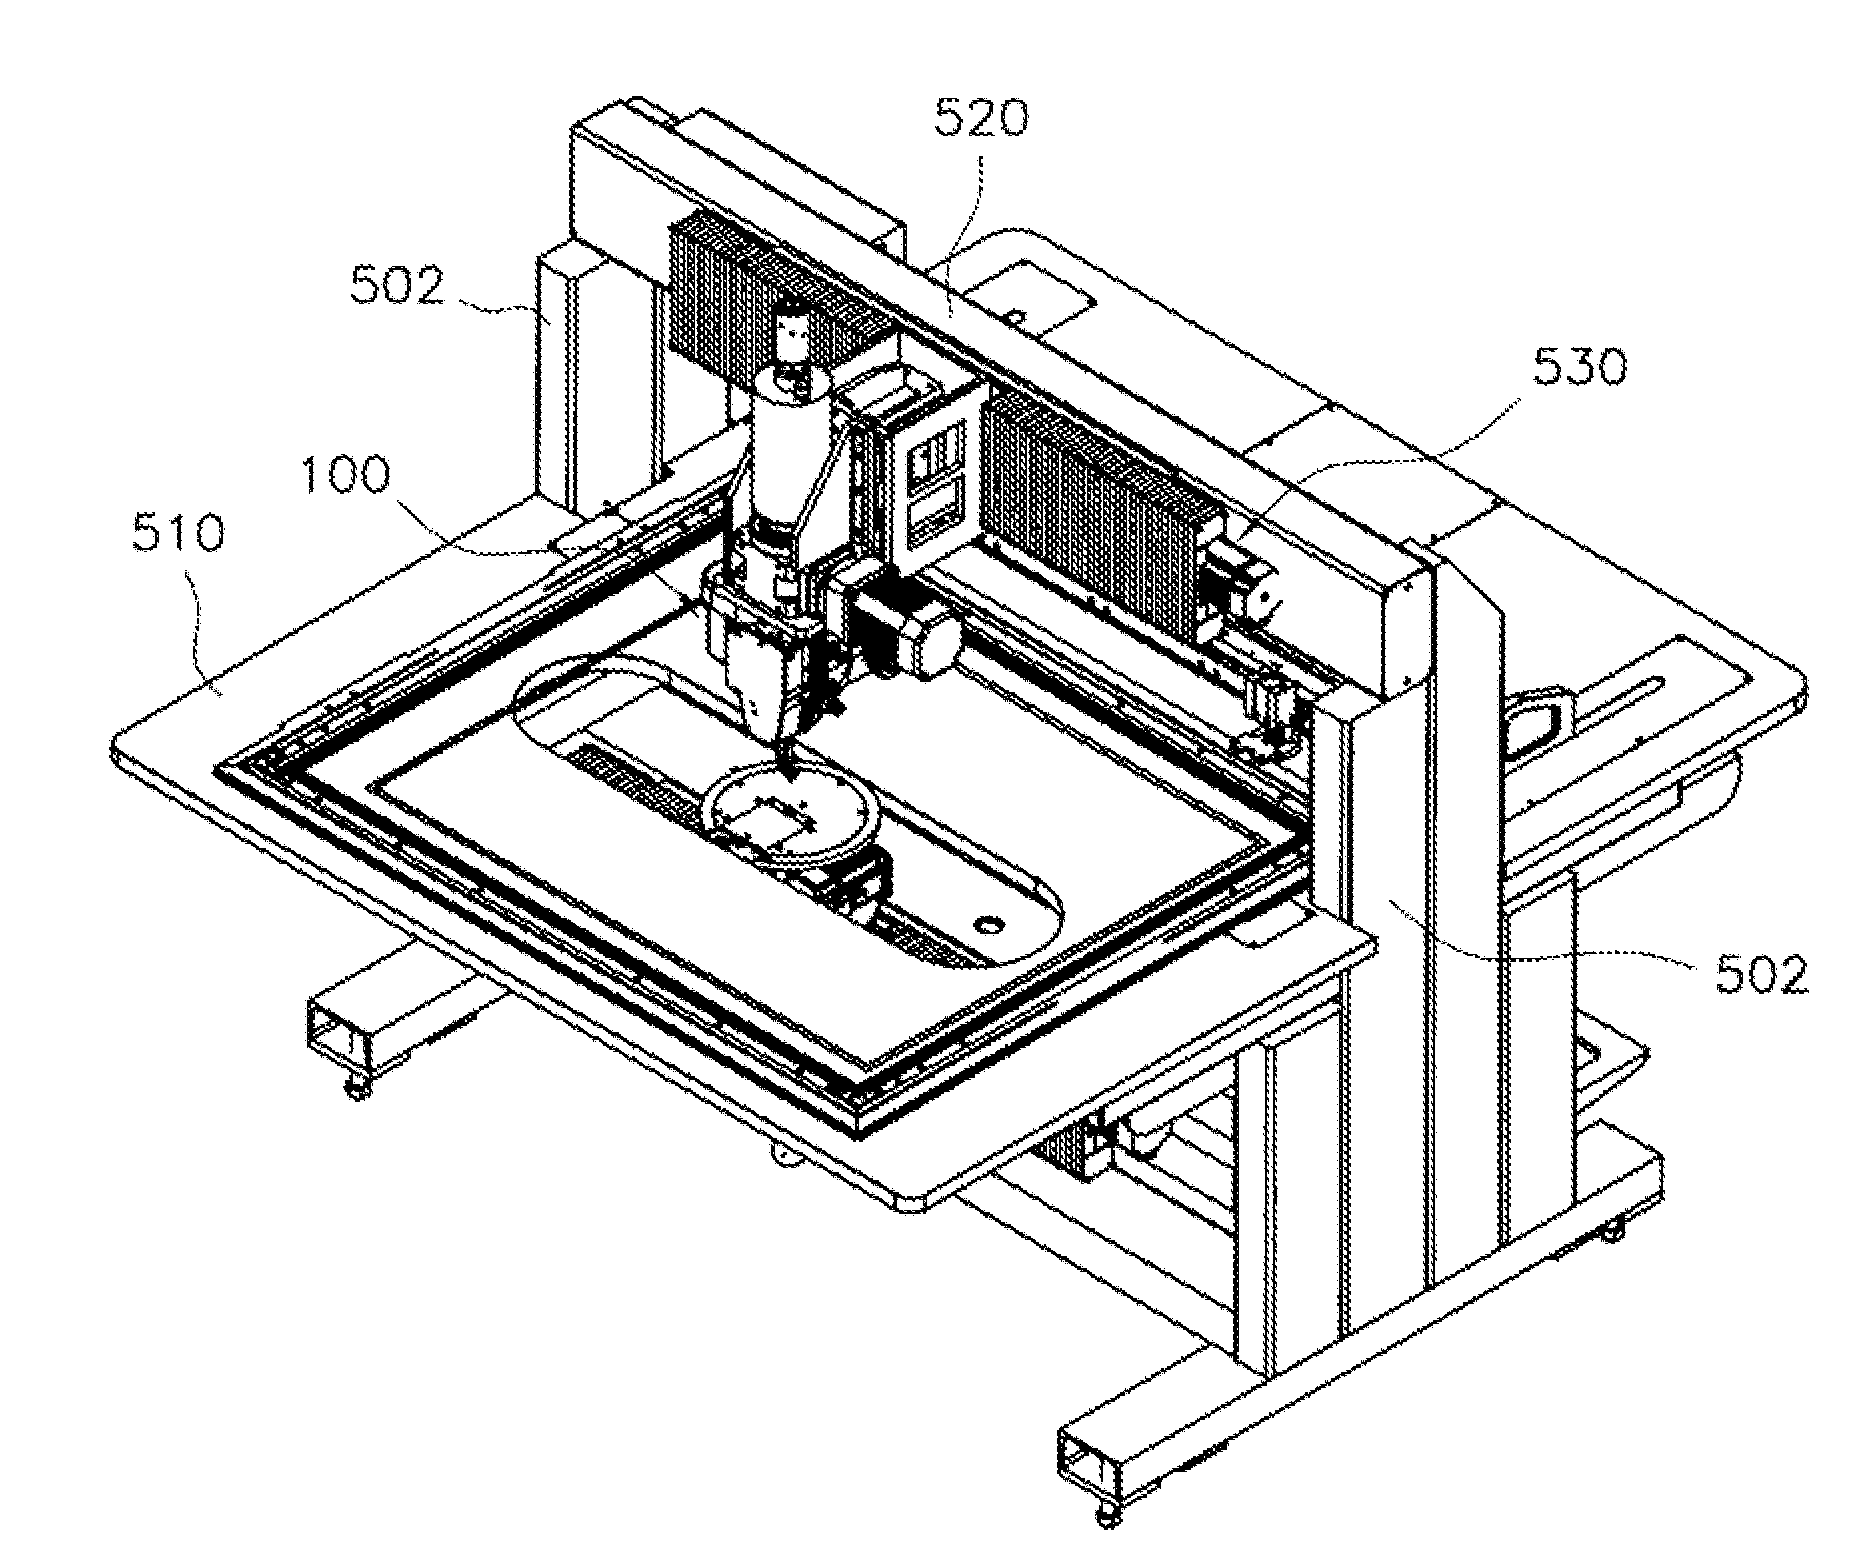 Sewing machine and method of controlling operation of the same